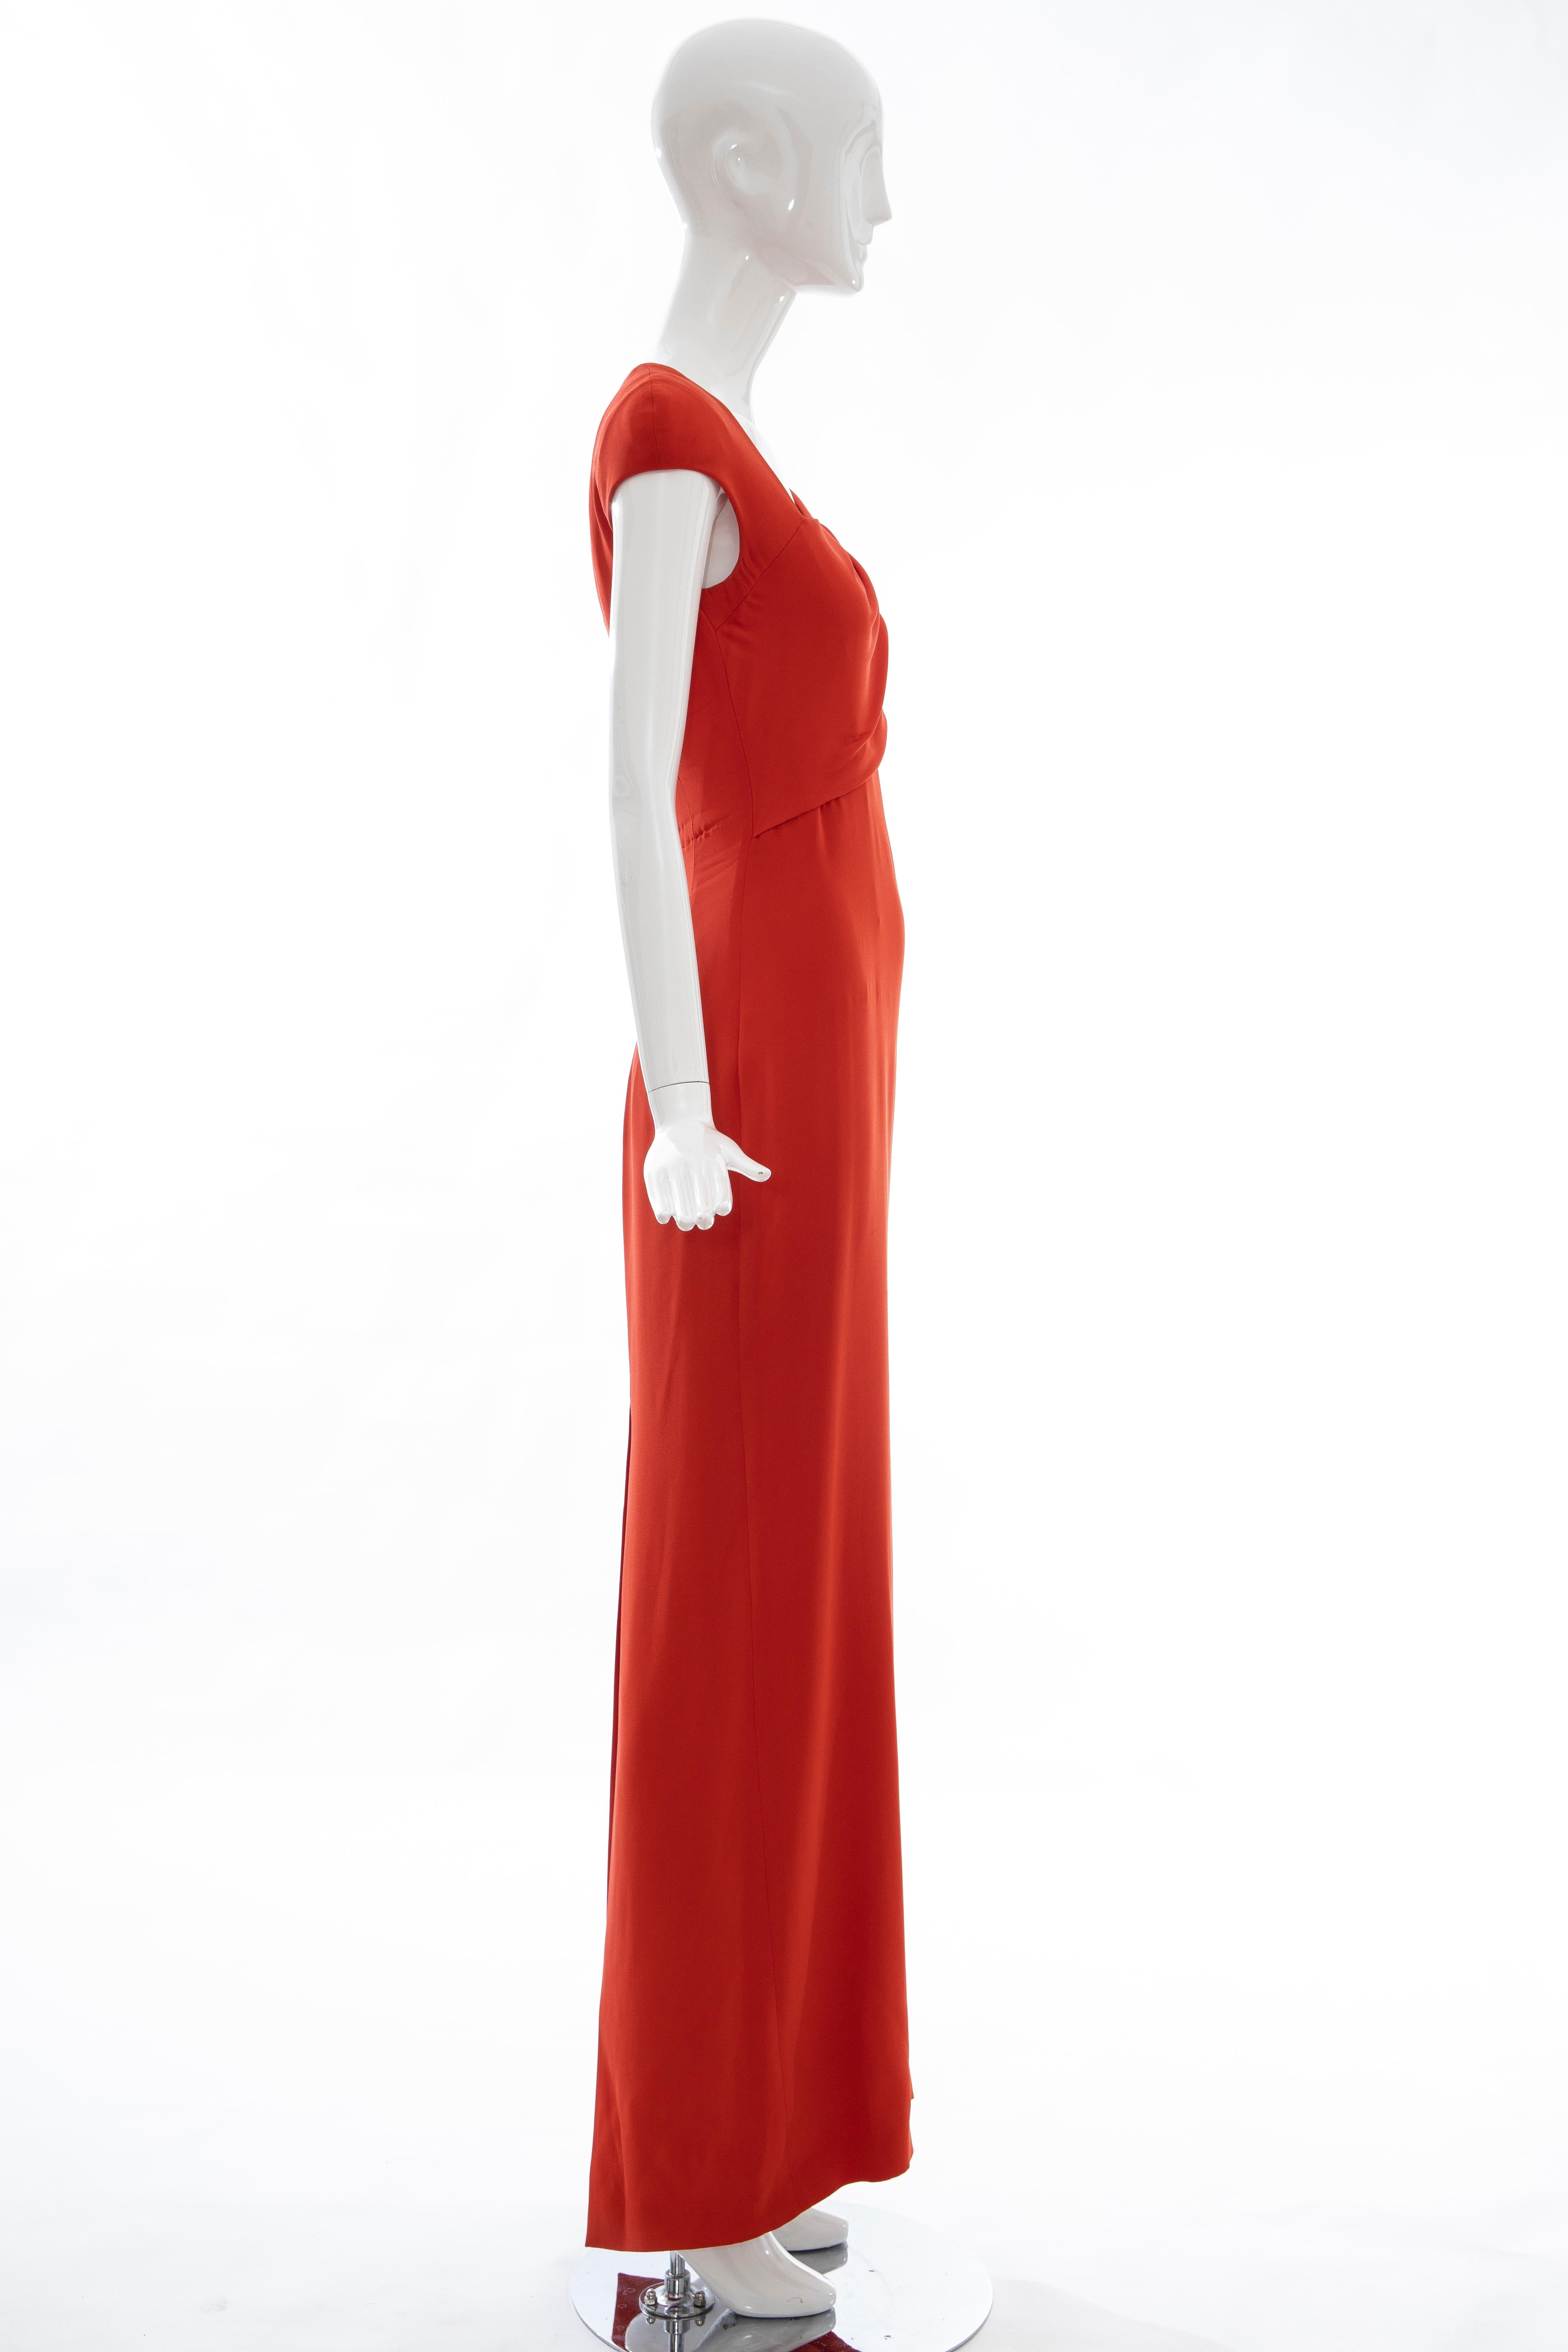 Tom Ford Runway Silk Persimmon Evening Dress With Cape, Fall 2012 8